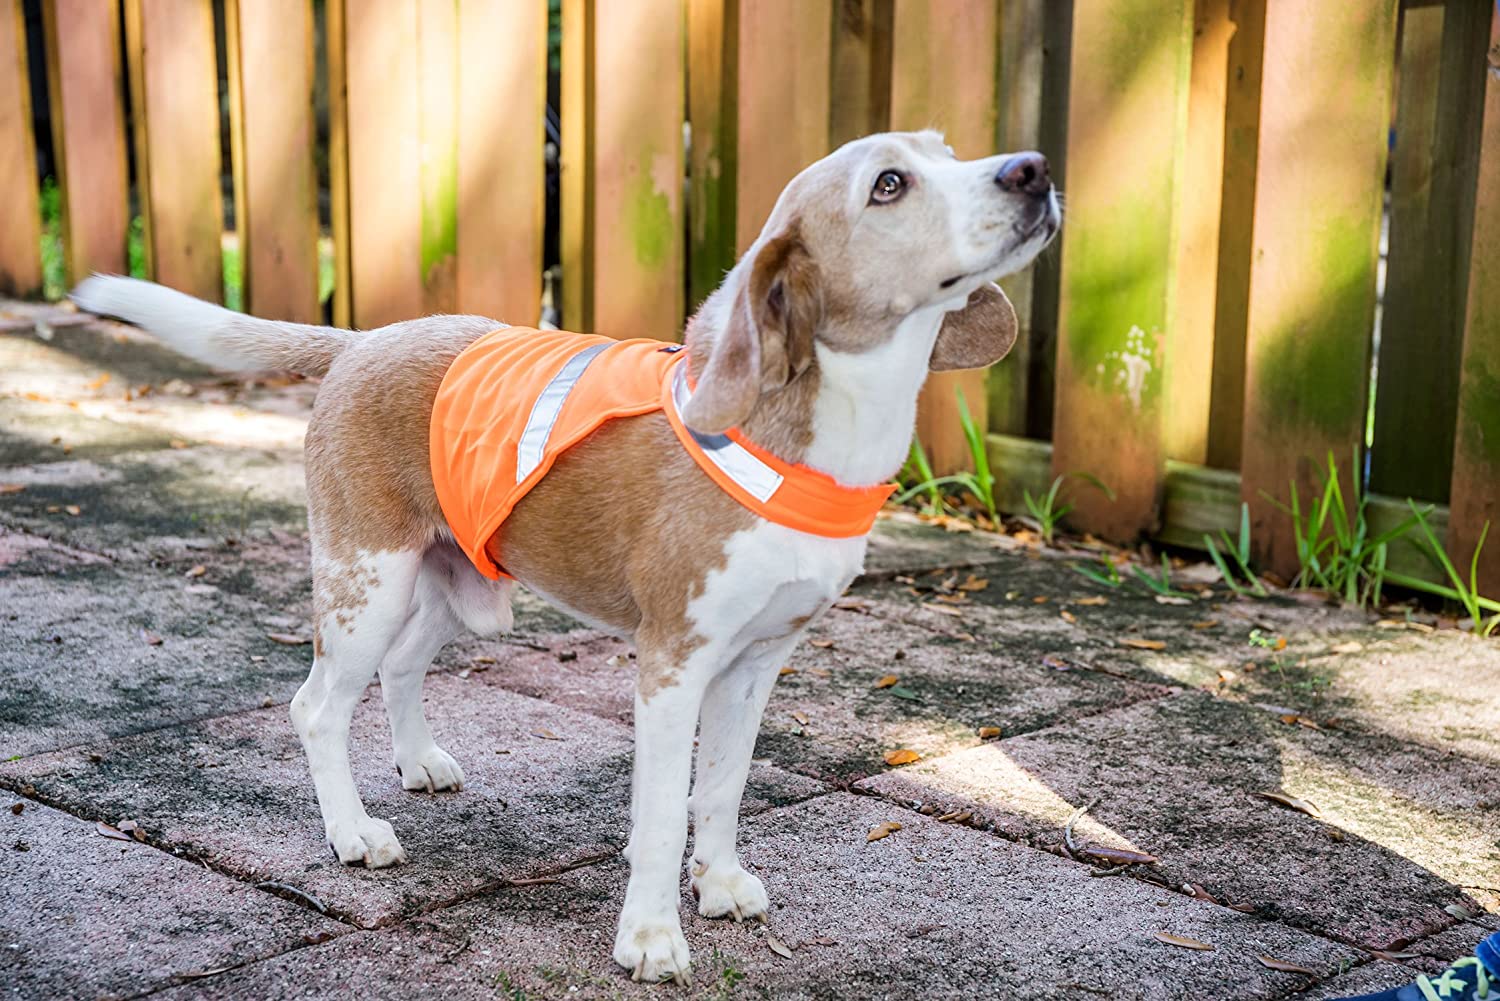 2PET Dog Hunting Vest and Safety Reflective Vest - Used for High Visibility - Protects Pets from Cars & Hunting Accidents in Both Urban and Rural Environments - Choose Color and Size